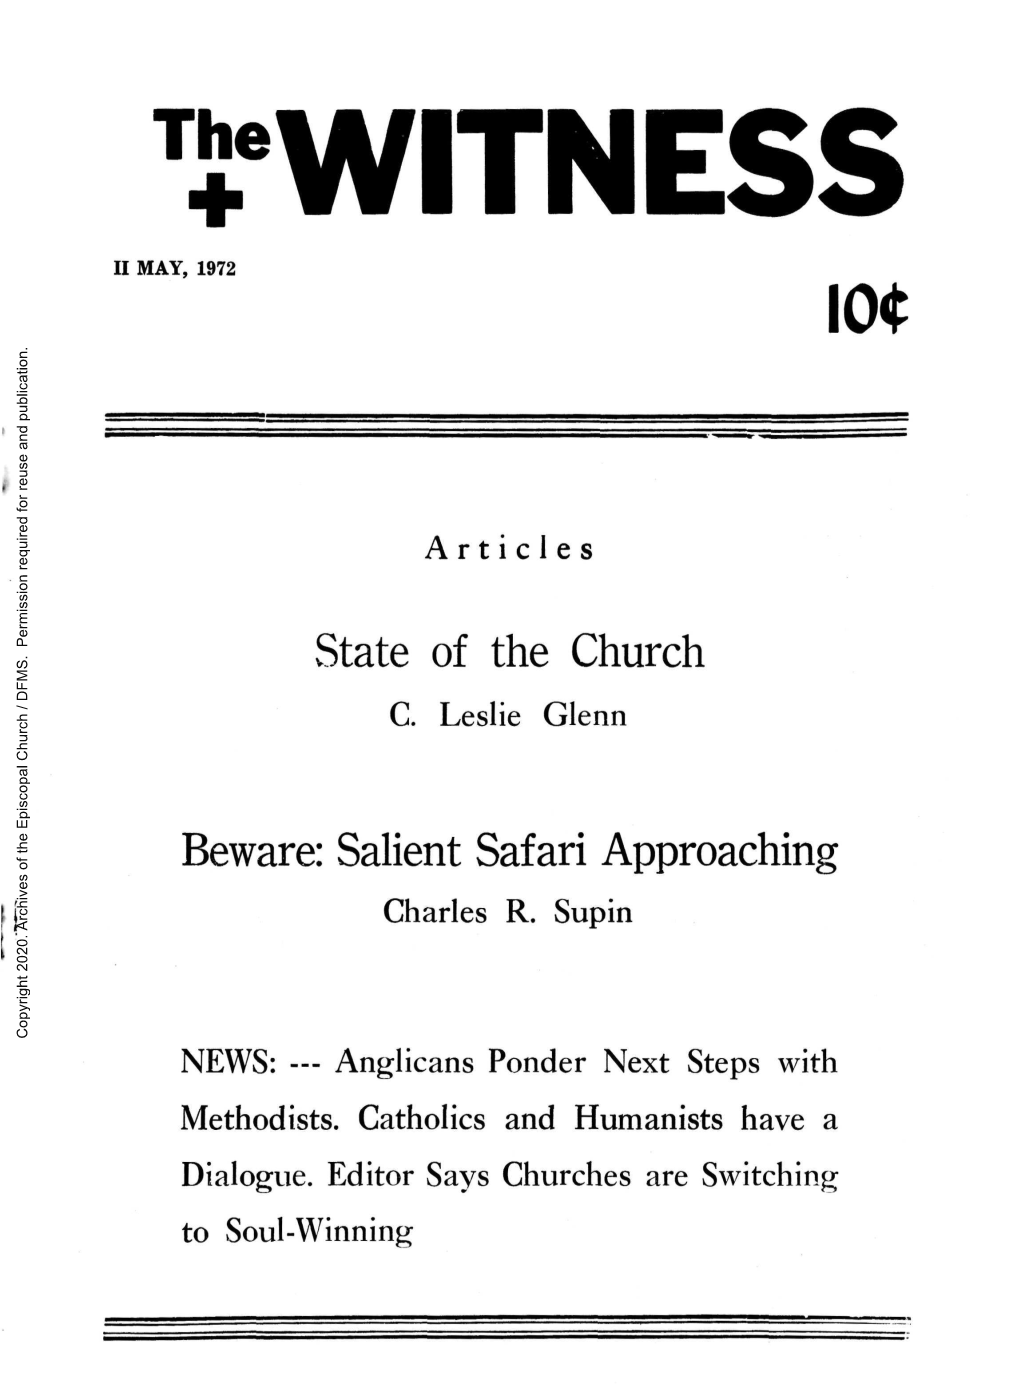 1972 the Witness, Vol. 57, No. 10